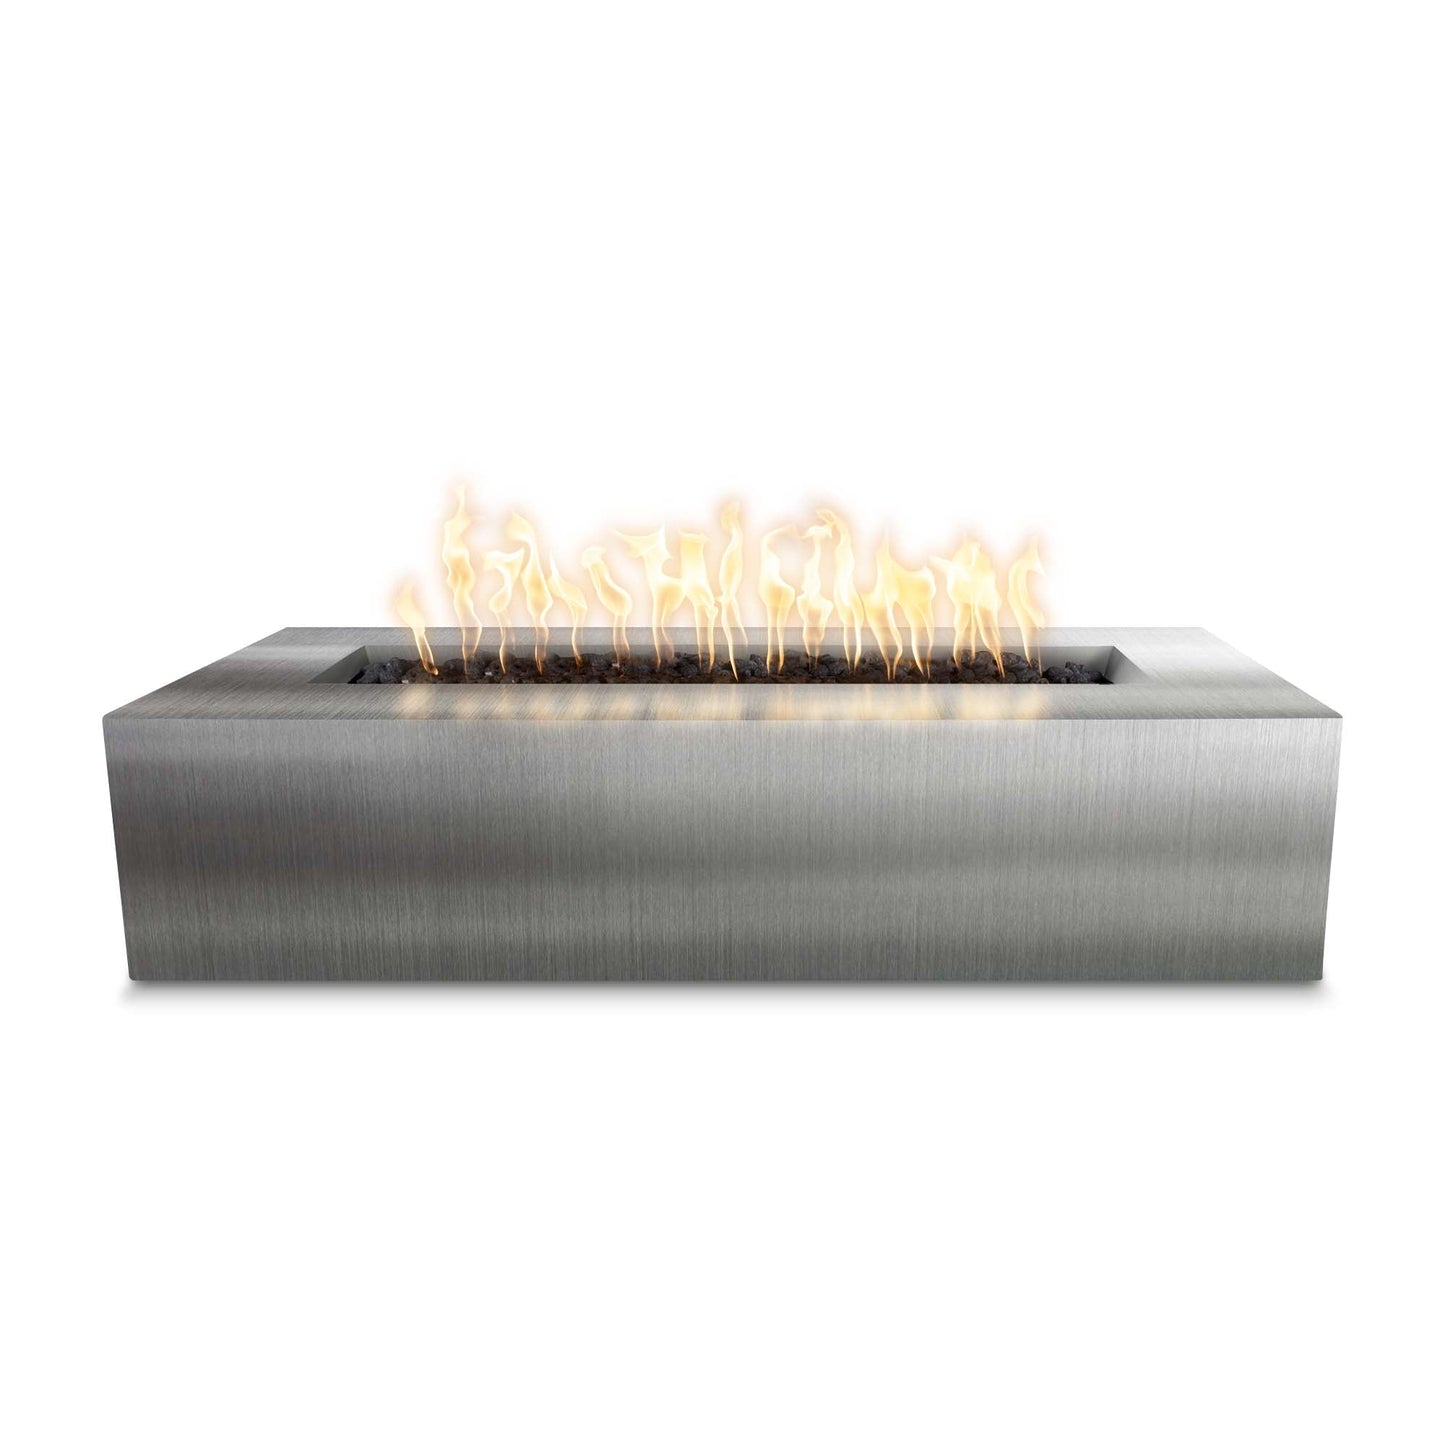 The Outdoor Plus Rectangular Regal 48" Hammered Copper Natural Gas Fire Pit with Match Lit with Flame Sense Ignition